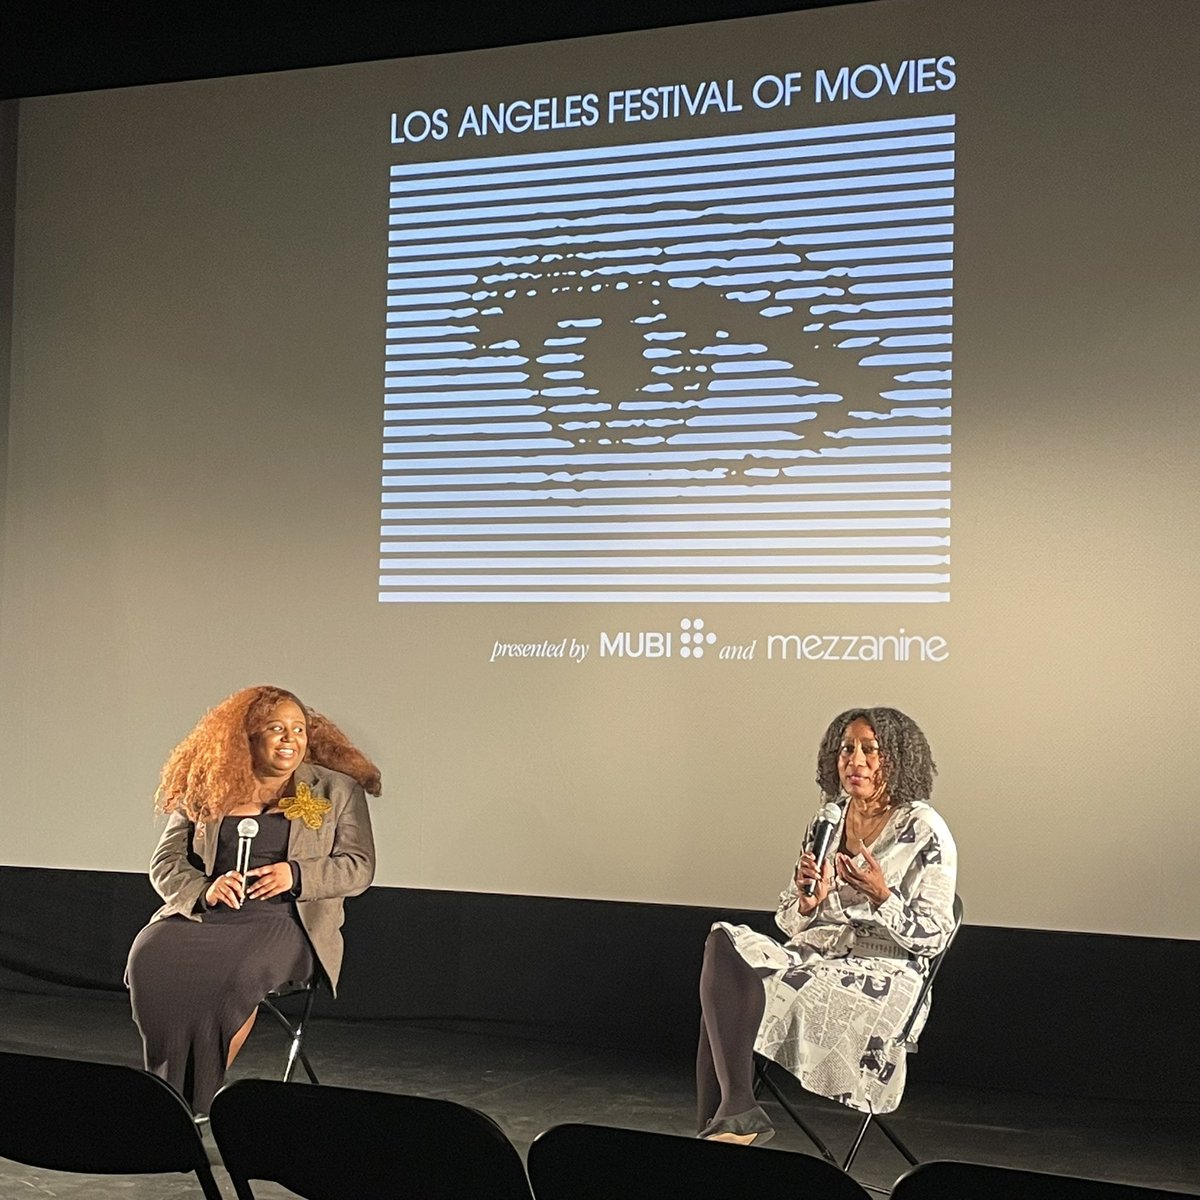 The 1st Los Angeles Festival of Movies! Really glad I checked out the new restoration of NAKED ACTS, a terrific 90s indie gem that deserves to be rediscovered. #LAFM24 @lafestivalofmov